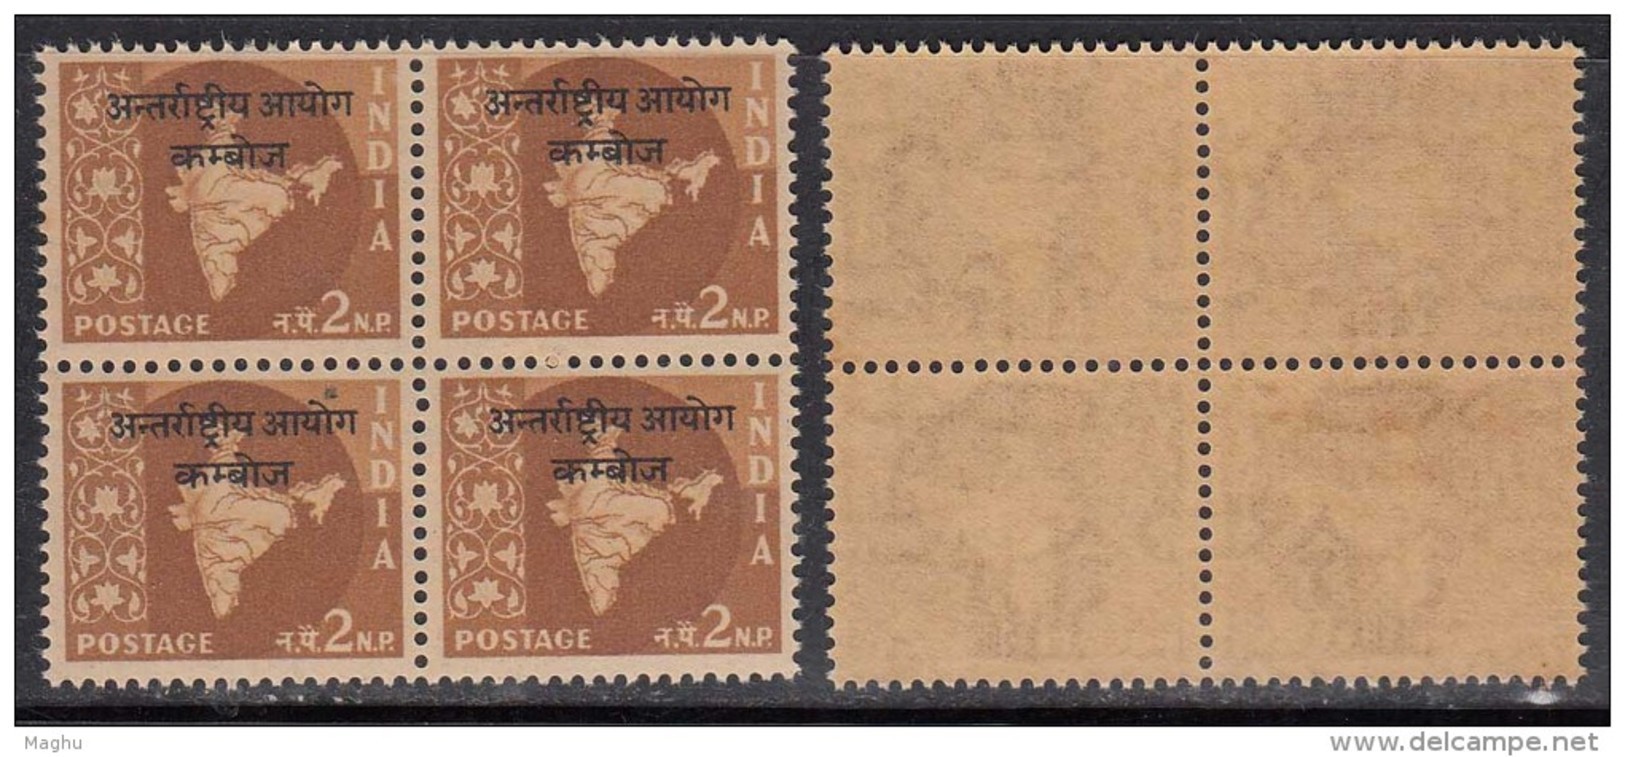 India MNH 1962, Ovpt. Cambodia On 2np Map Series, Ashokan Watermark, Block Of 4, - Military Service Stamp